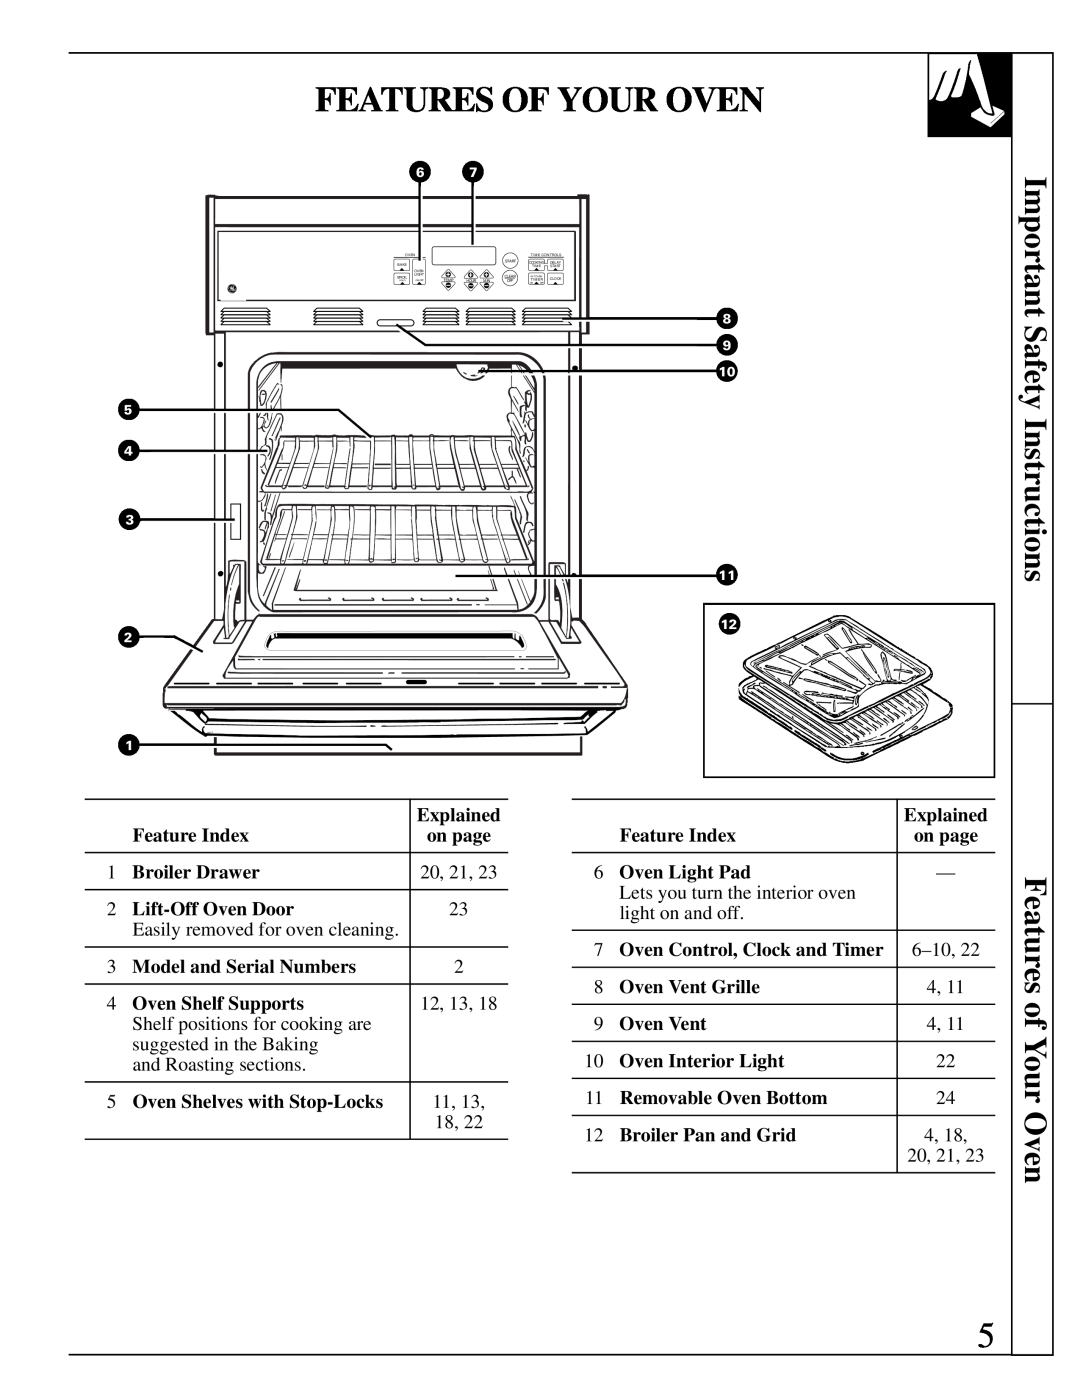 GE JGRS14 Features Of Your Oven, Features of Your Oven, Important Safety Instructions, Explained, Feature Index, Oven Vent 